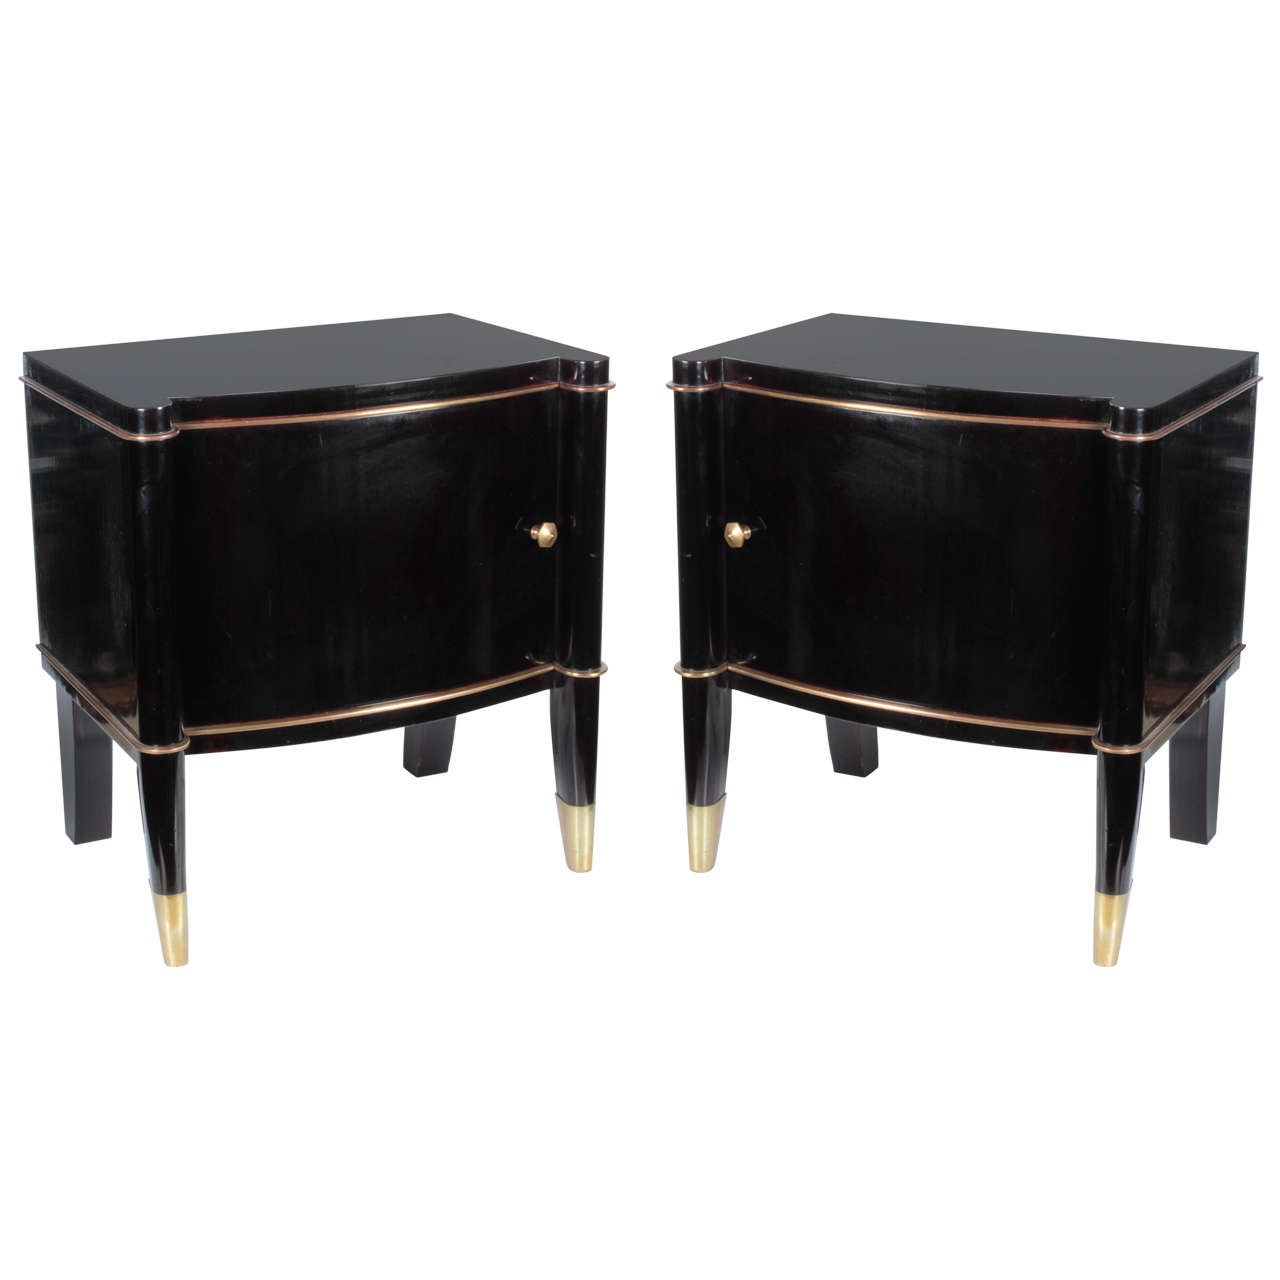 Pair of Antique French Art Deco Black Lacquer and Gilt Bronze Side Cabinets